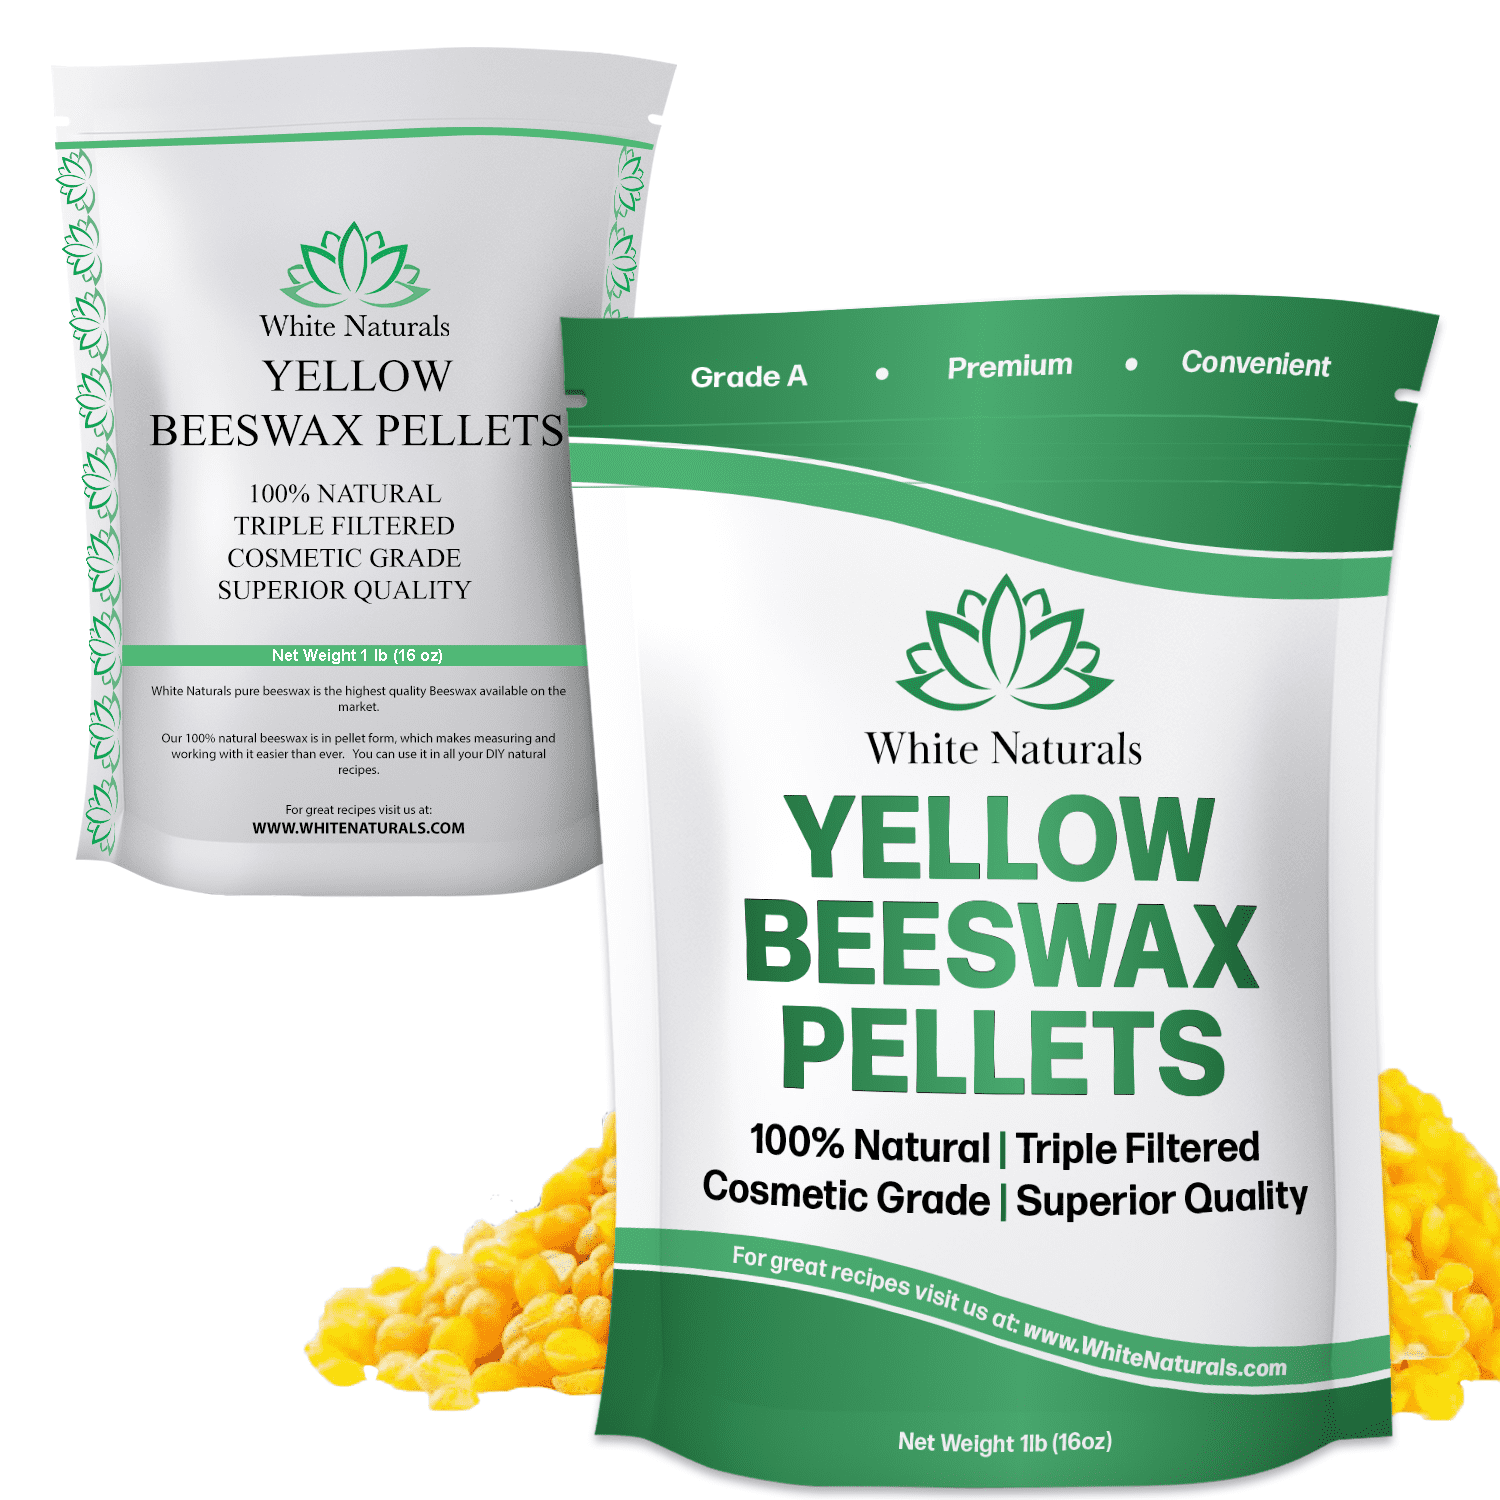  Myido Beeswax Granules 10 lb, White, Pure, Beeswax granules,  Triple Filtered, Great for DIY Projects, Lip balms, lotions, Shoe Polishes,  Wood conditioners.